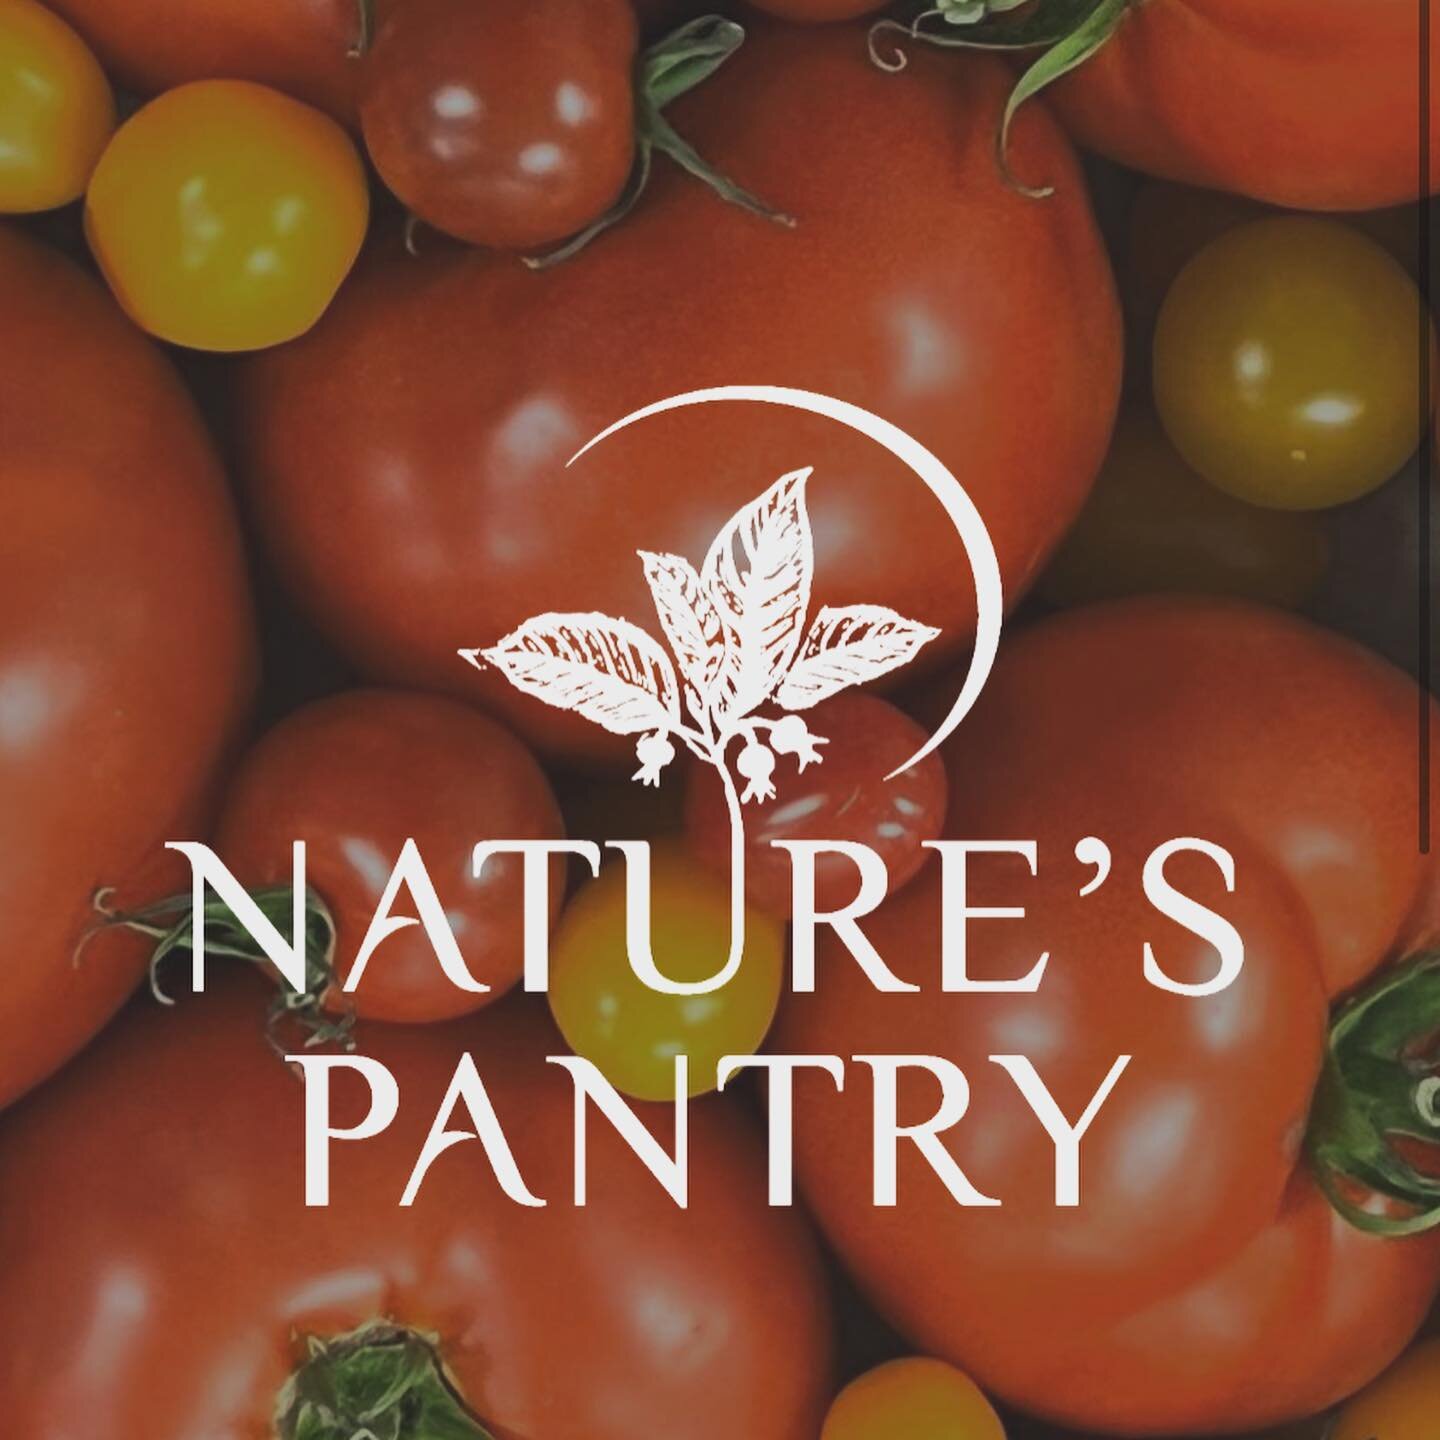 Our next vendor feature is our friends over at @naturespantrysmithers 

We are loving their big new store and all our fridge and freezer space 

Here you can find our fresh salad bowls, dips and dressings, cookies and freezer meals

They are open Mon